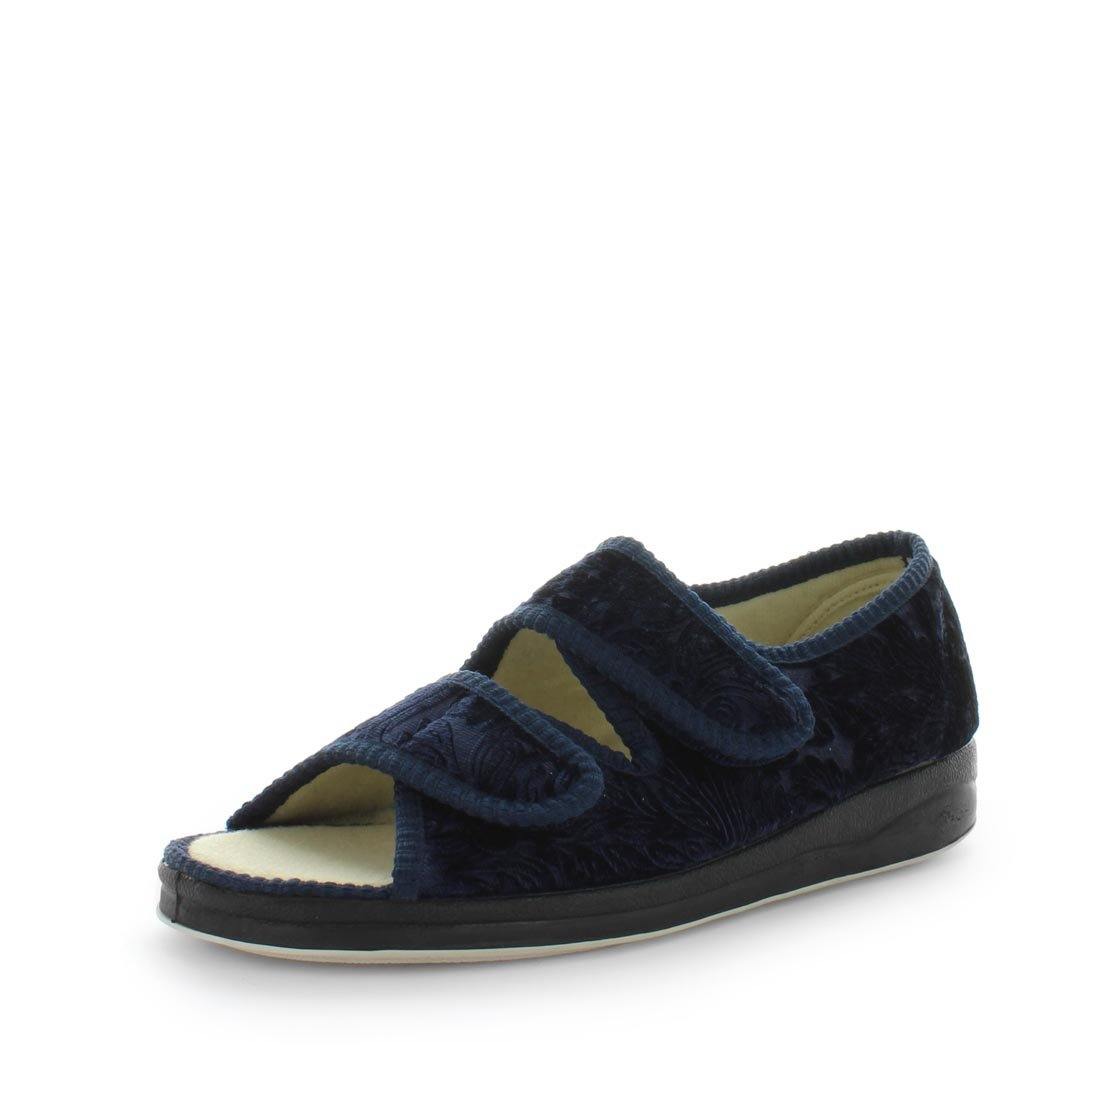 womens slippers - Navy entice slipper, by panda Slippers. A sandal slipper with a soft micro-fibre design, multiple velcro straps and a padded footbed for an extra comfy fit - comfort summer womens slippers